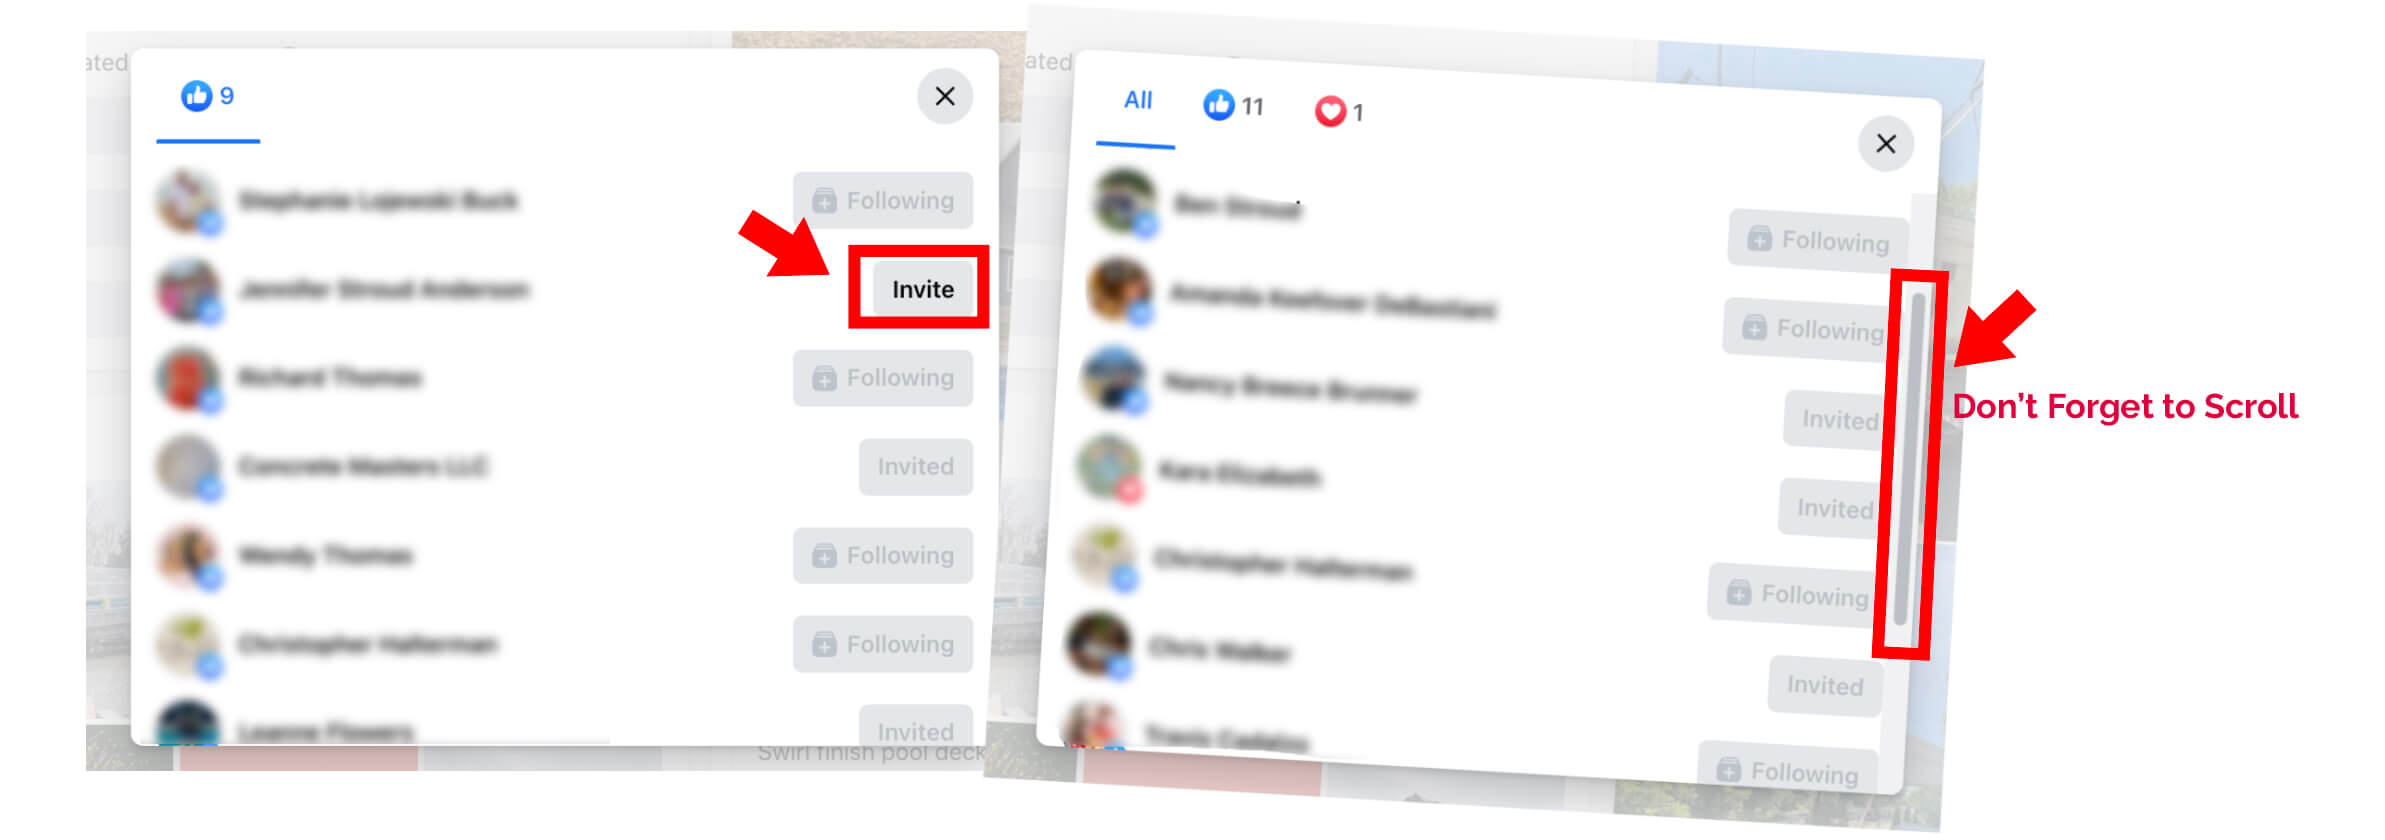 You may ask, "How do I invite individuals or businesses who engage with my posts?" Go to your post, and click where you see the number of engagements to the right of the symbols (i.e., the icons for thumbs-up, heart, care, etc.). This will open a modal window that is scrollable. For each listing, if there is a button to "Invite" click it. This will trigger a follow request to the individual.